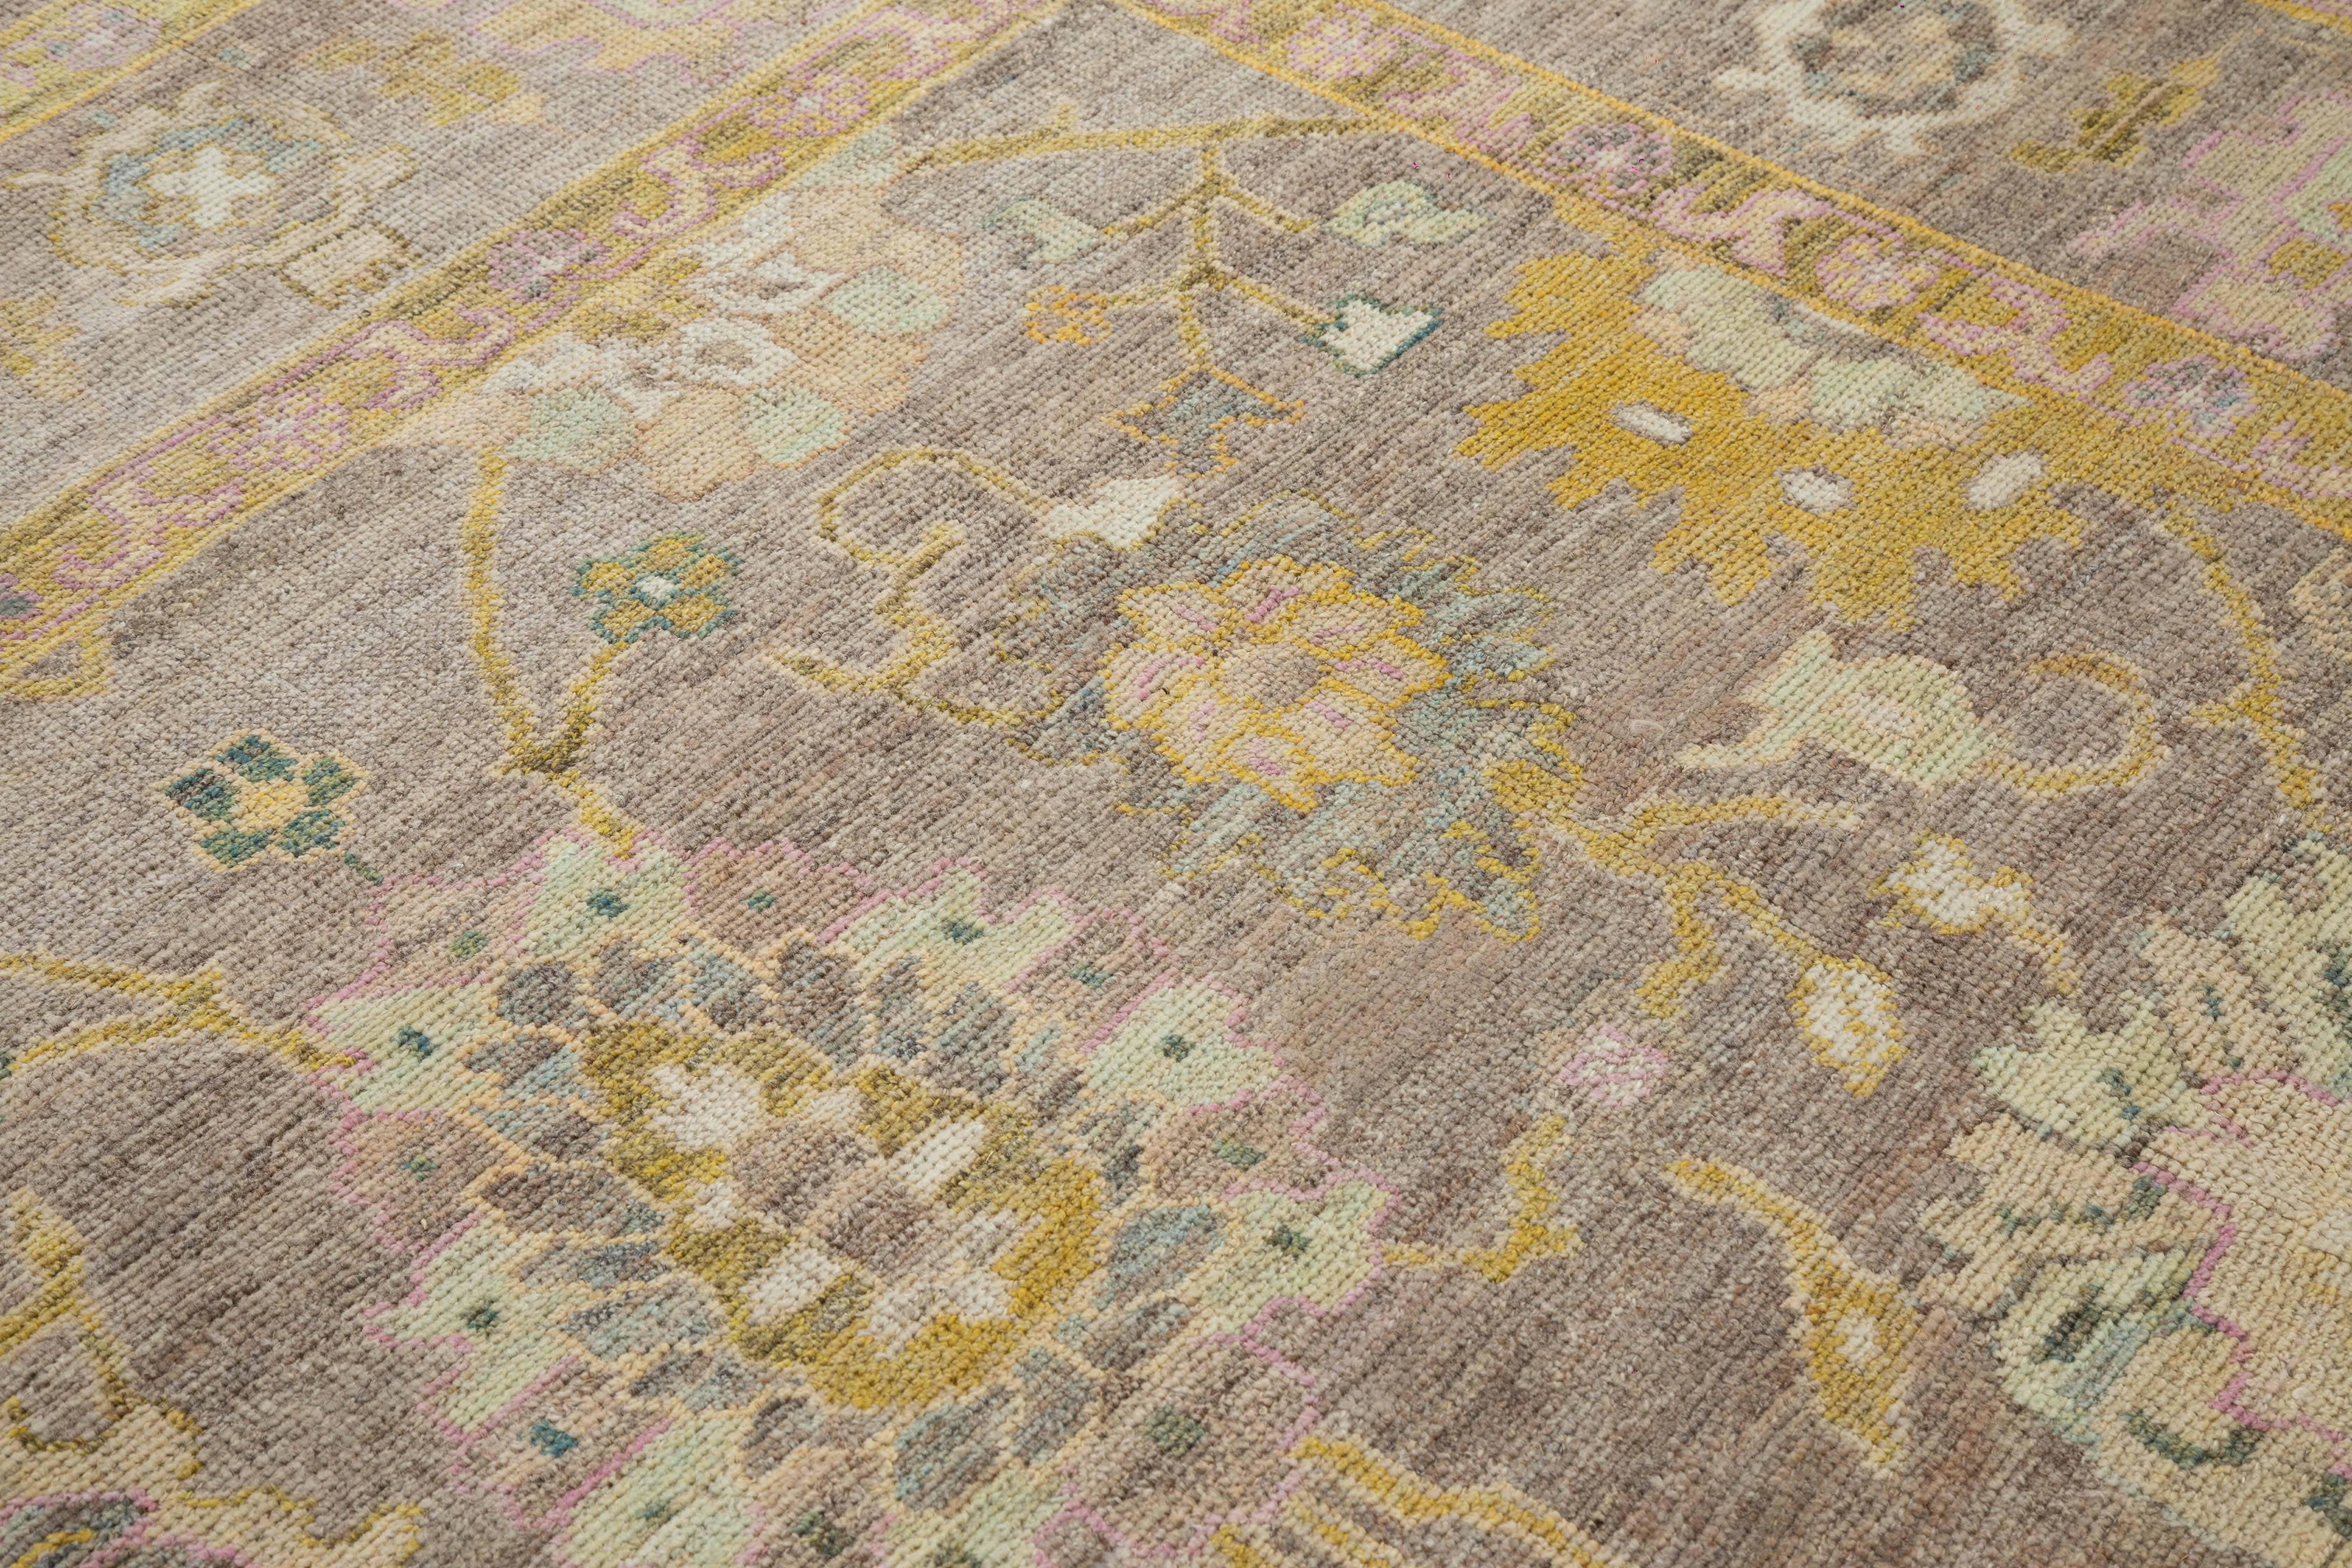 Modern Turkish area rug made of handwoven sheep’s wool of the finest quality. It’s colored with organic vegetable dyes that are certified safe for humans and pets alike. It features a brown field with allover floral patterns in pink, green and gold